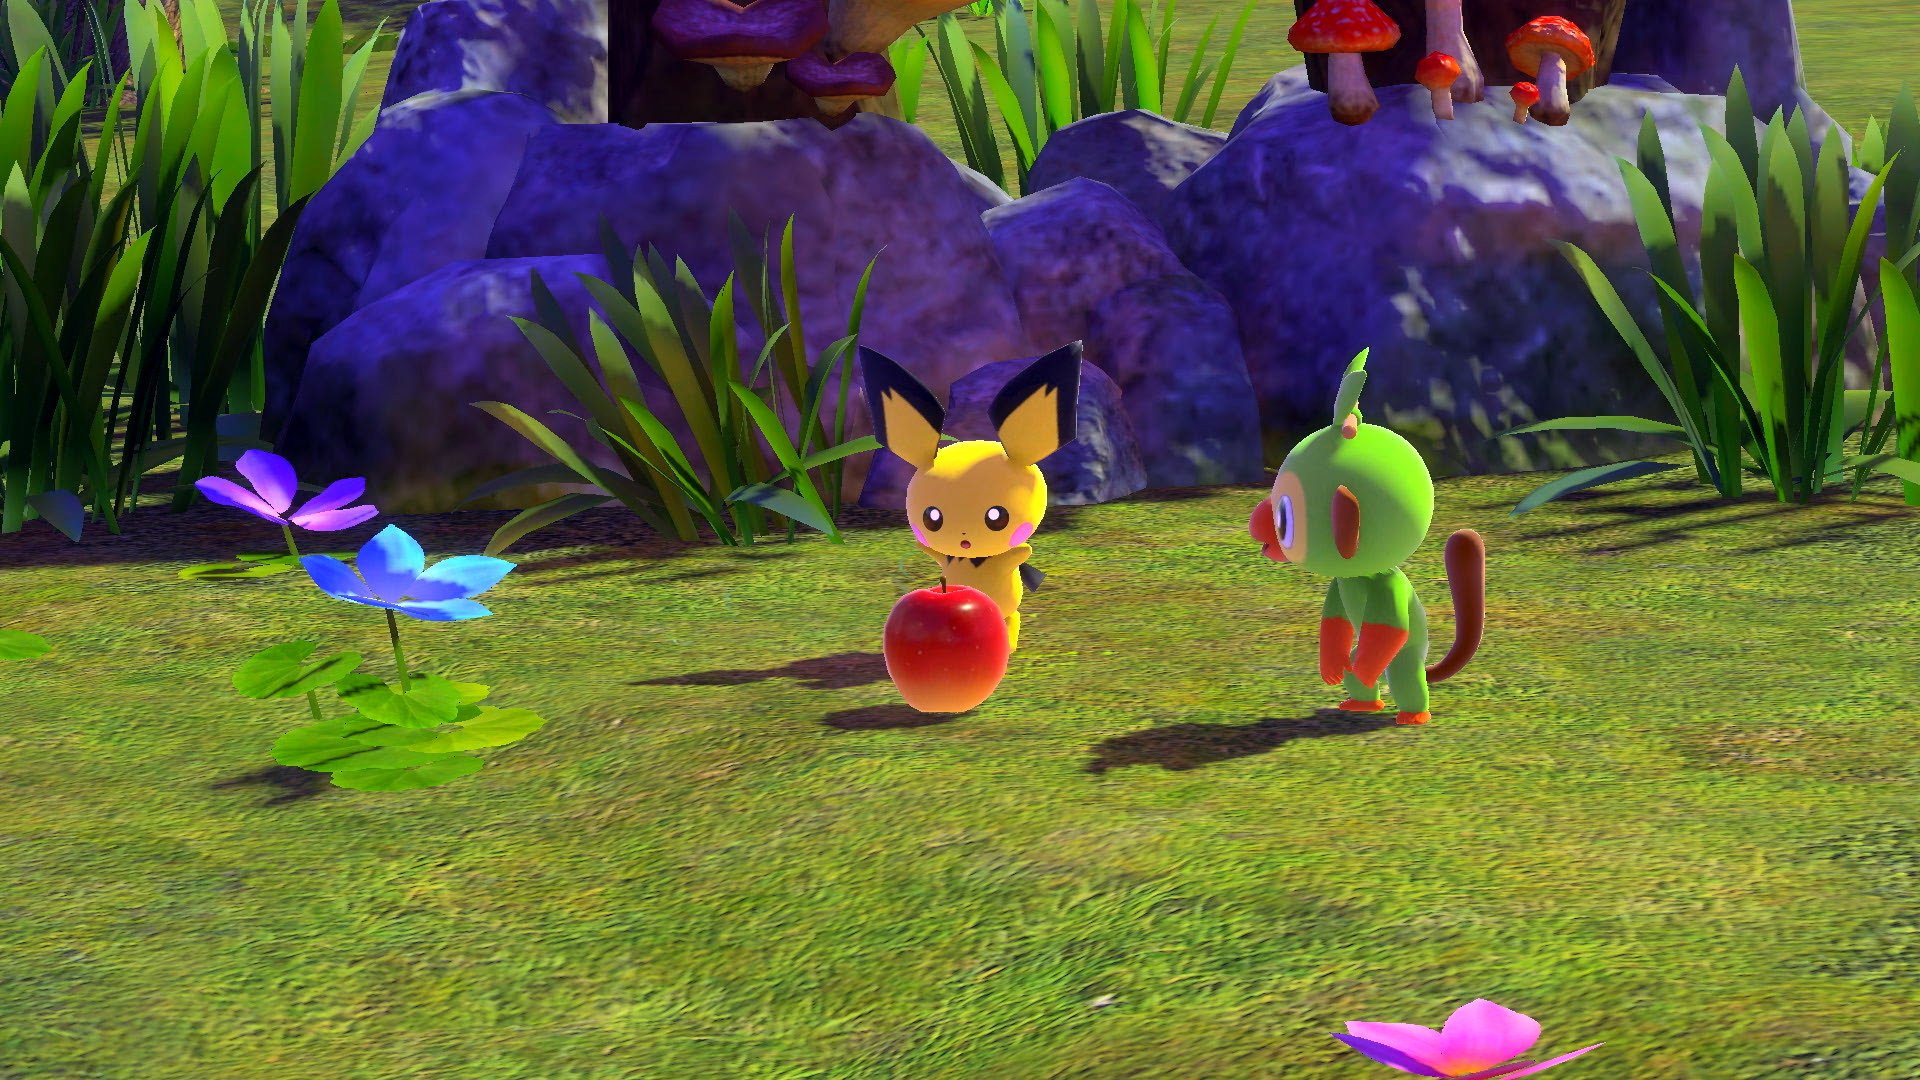 New Pokemon Snap fluffruit can be used to create unique photo opportunities  | GamesRadar+